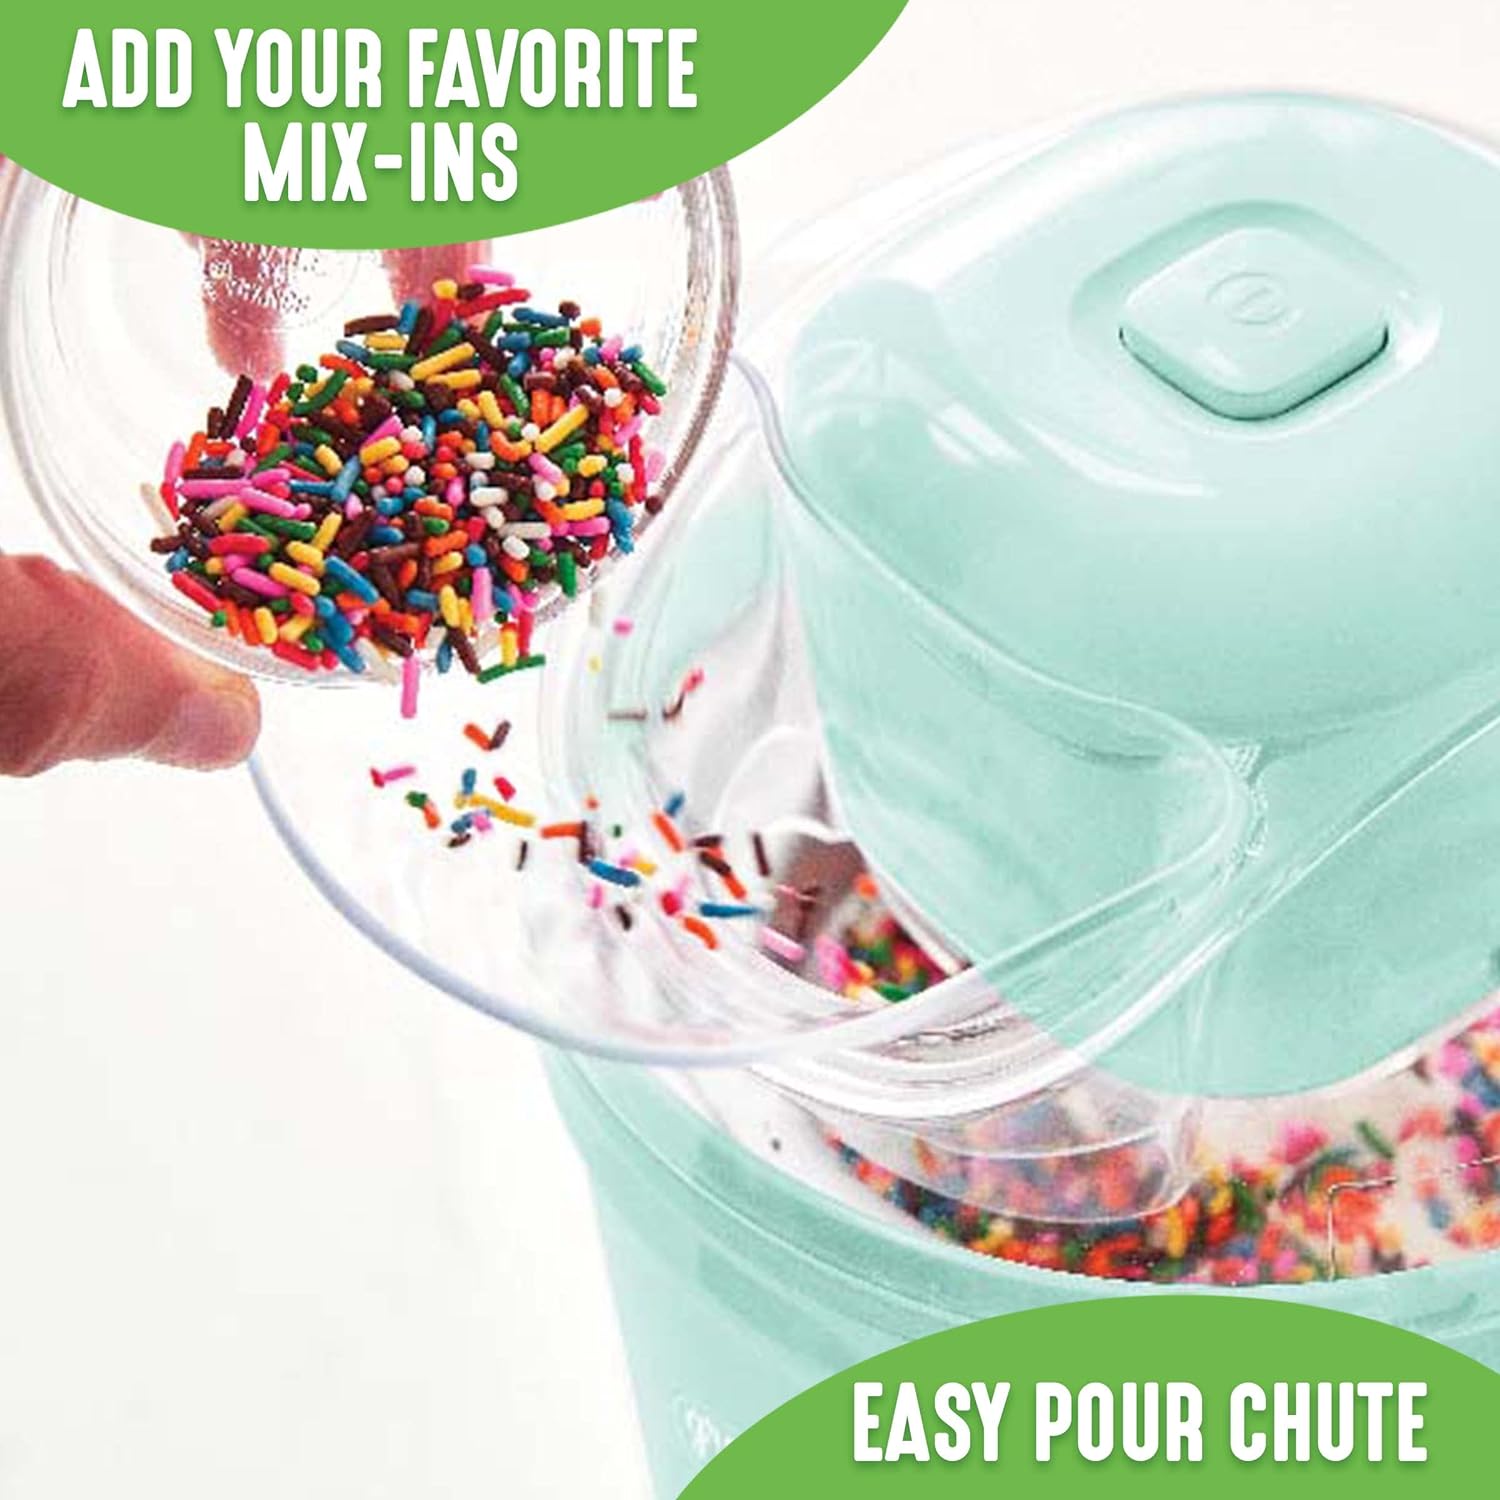 GreenLife Healthy Ceramic Nonstick 1.5QT Express Ice Cream Maker, Turquoise or Red